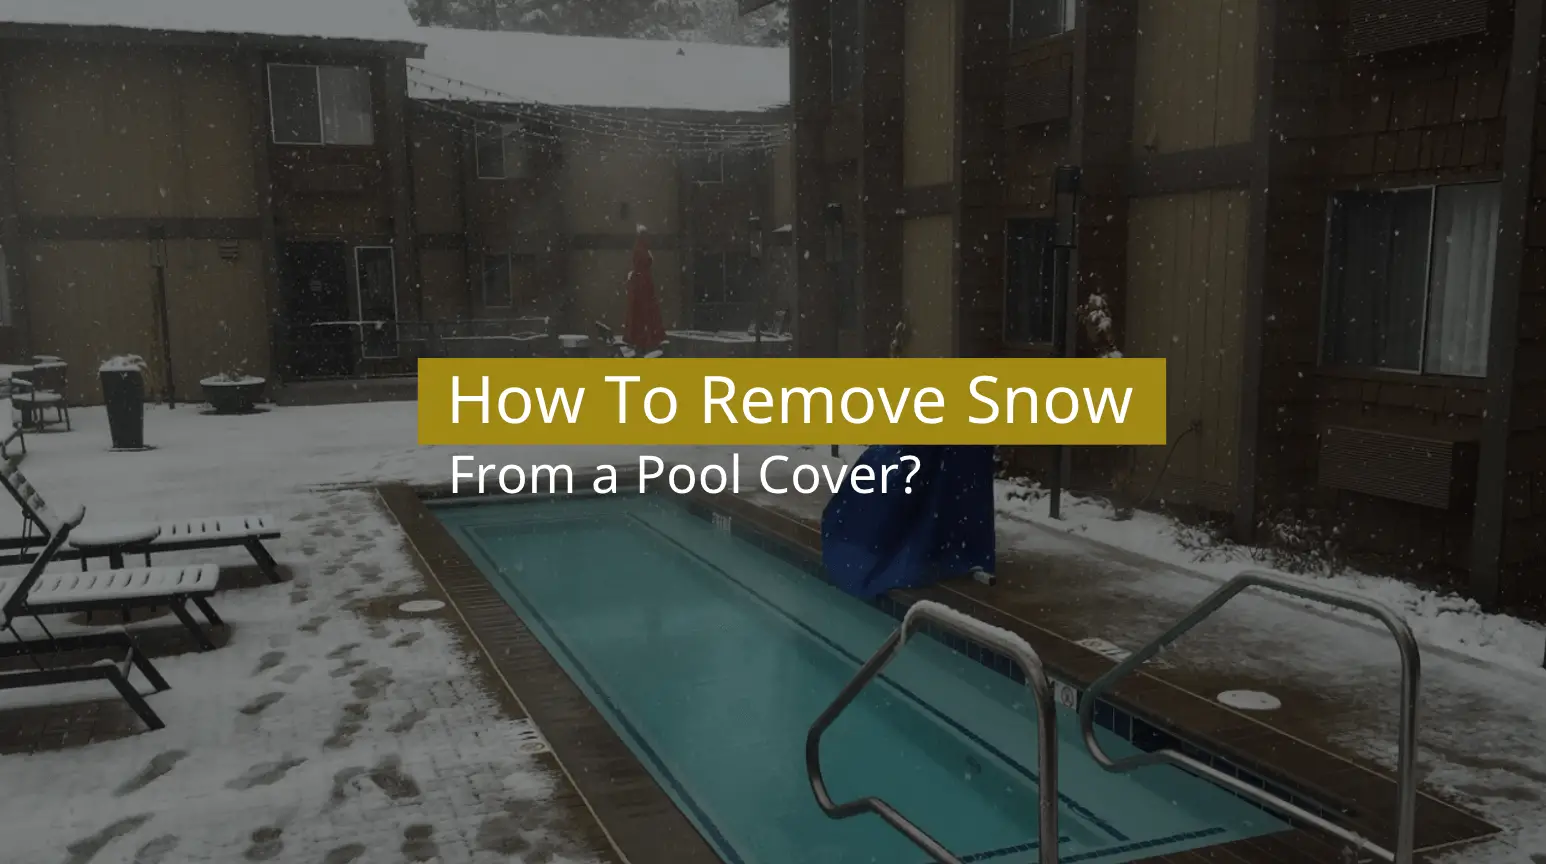 How To Remove Snow From a Pool Cover? (Top 5 Steps)